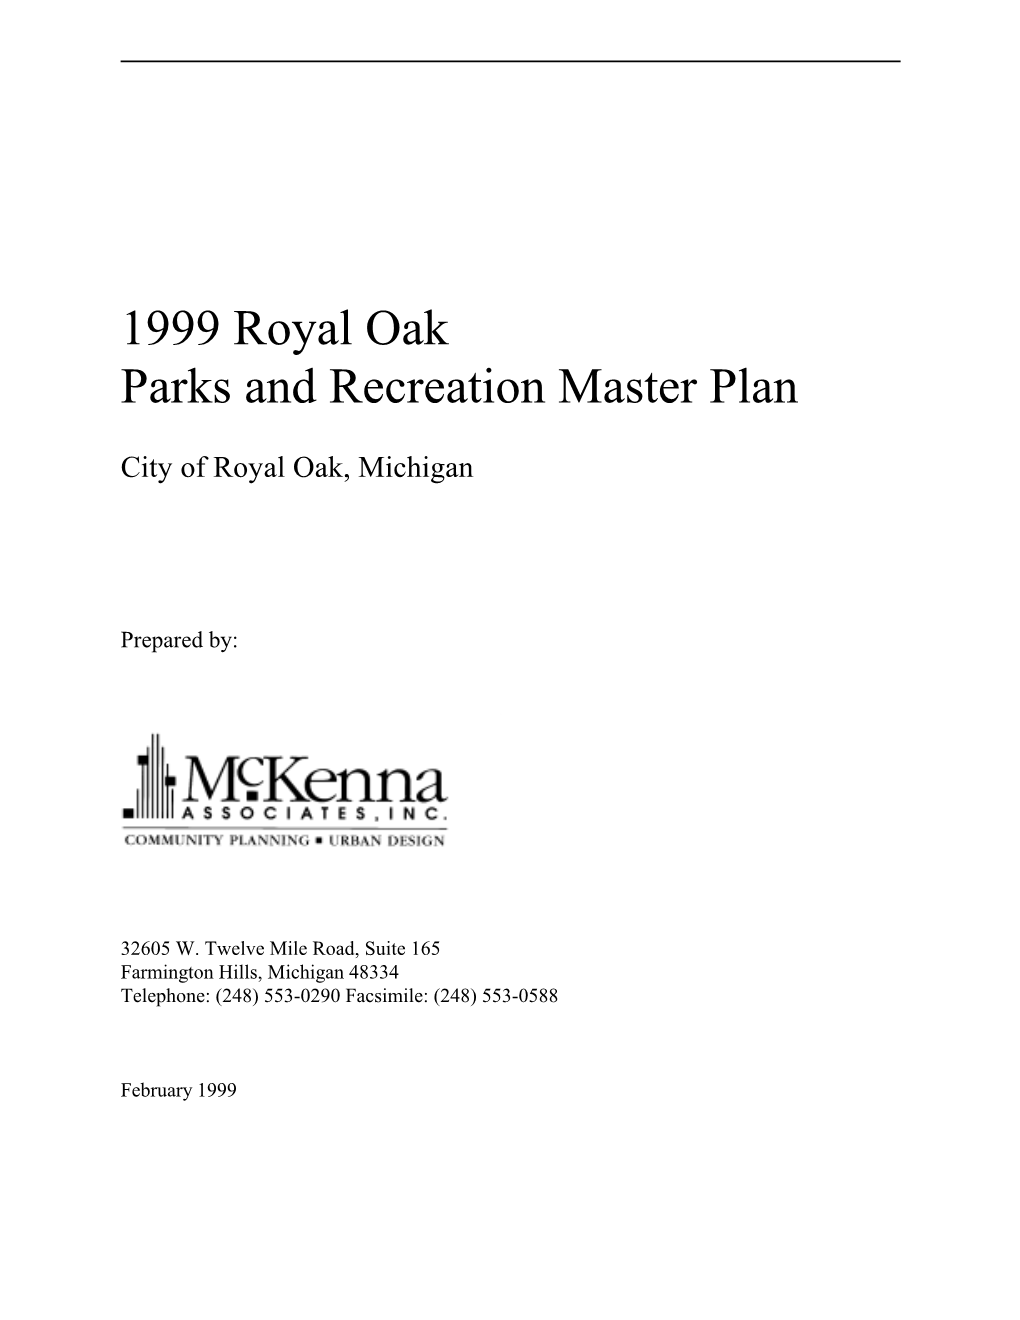 1999 Parks and Rec Master Plan